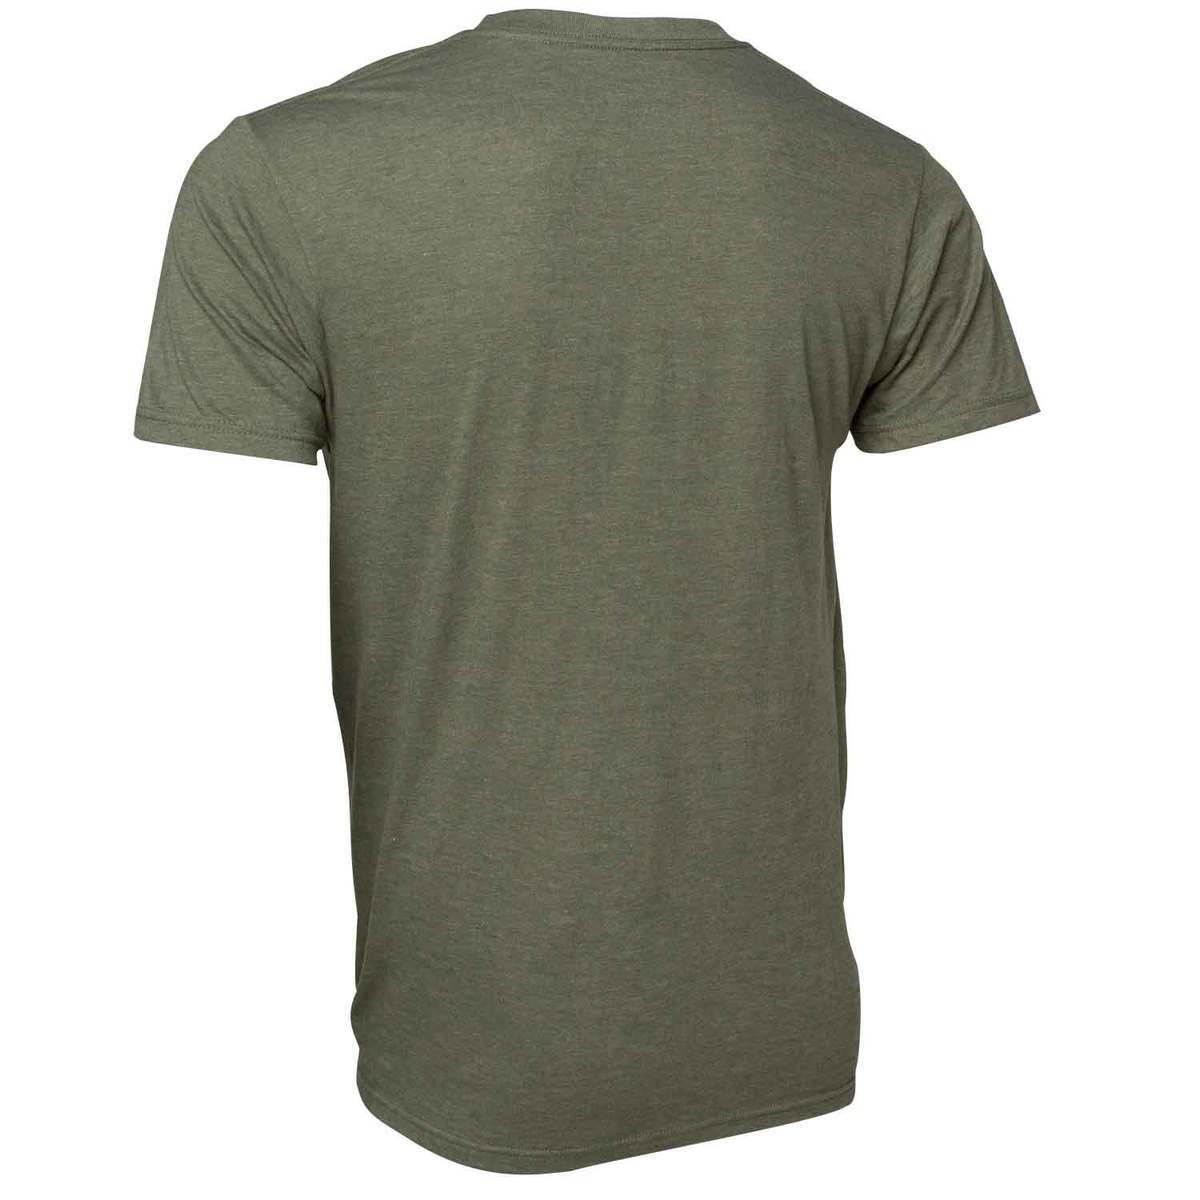 Sportsman's Warehouse Men's Personal Protection Short Sleeve T-Shirt ...